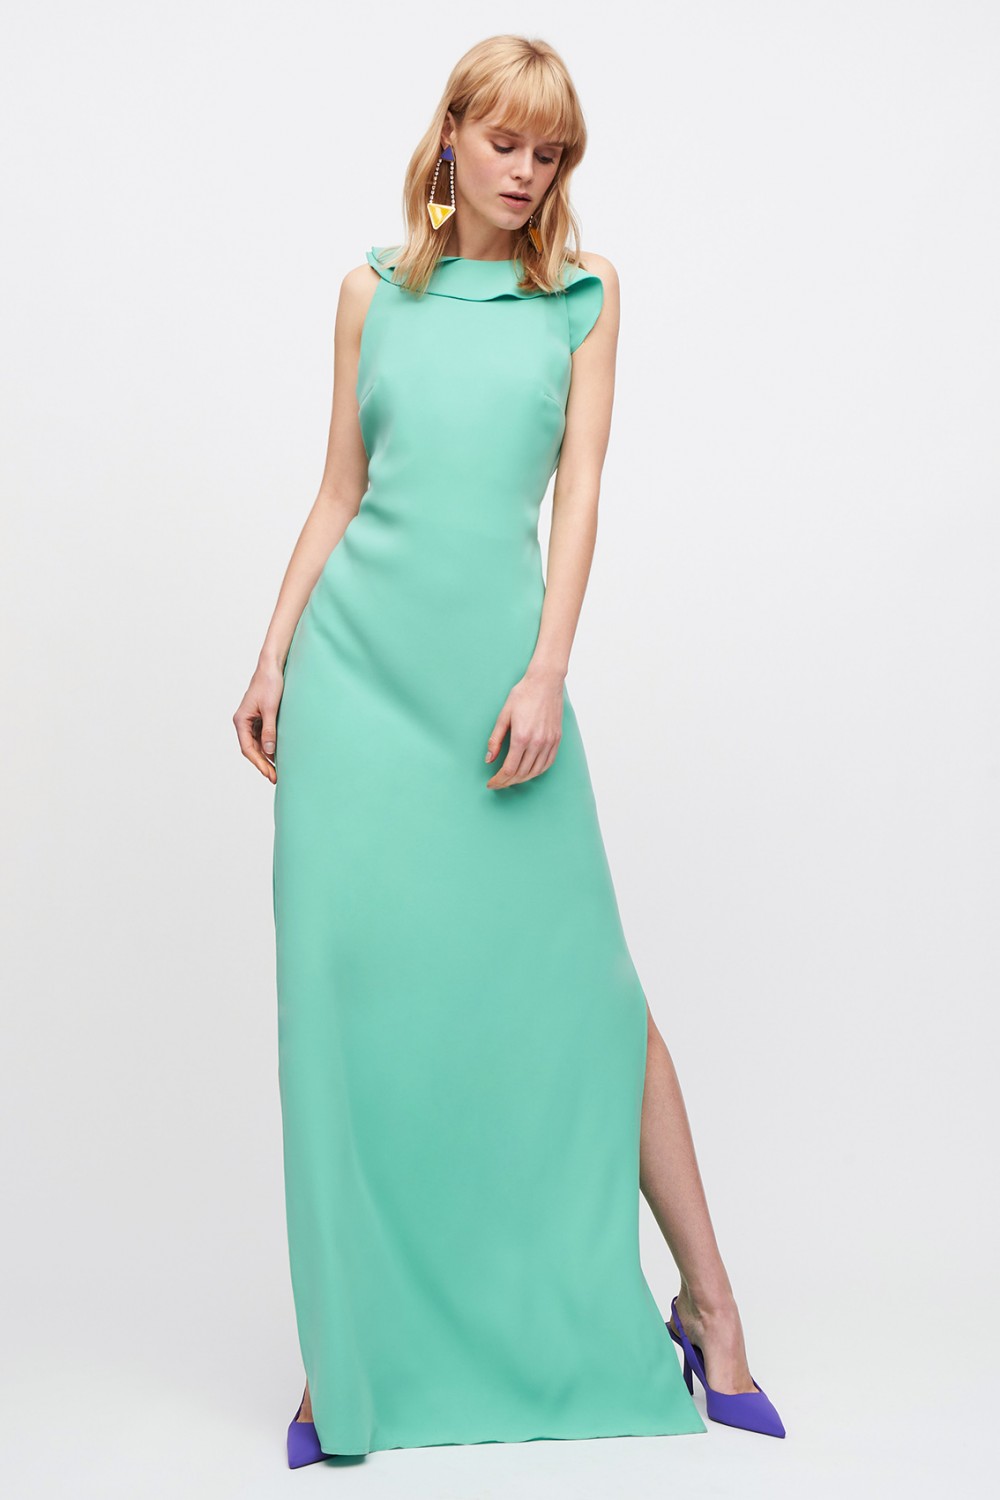 Mint green dress with front ruffles